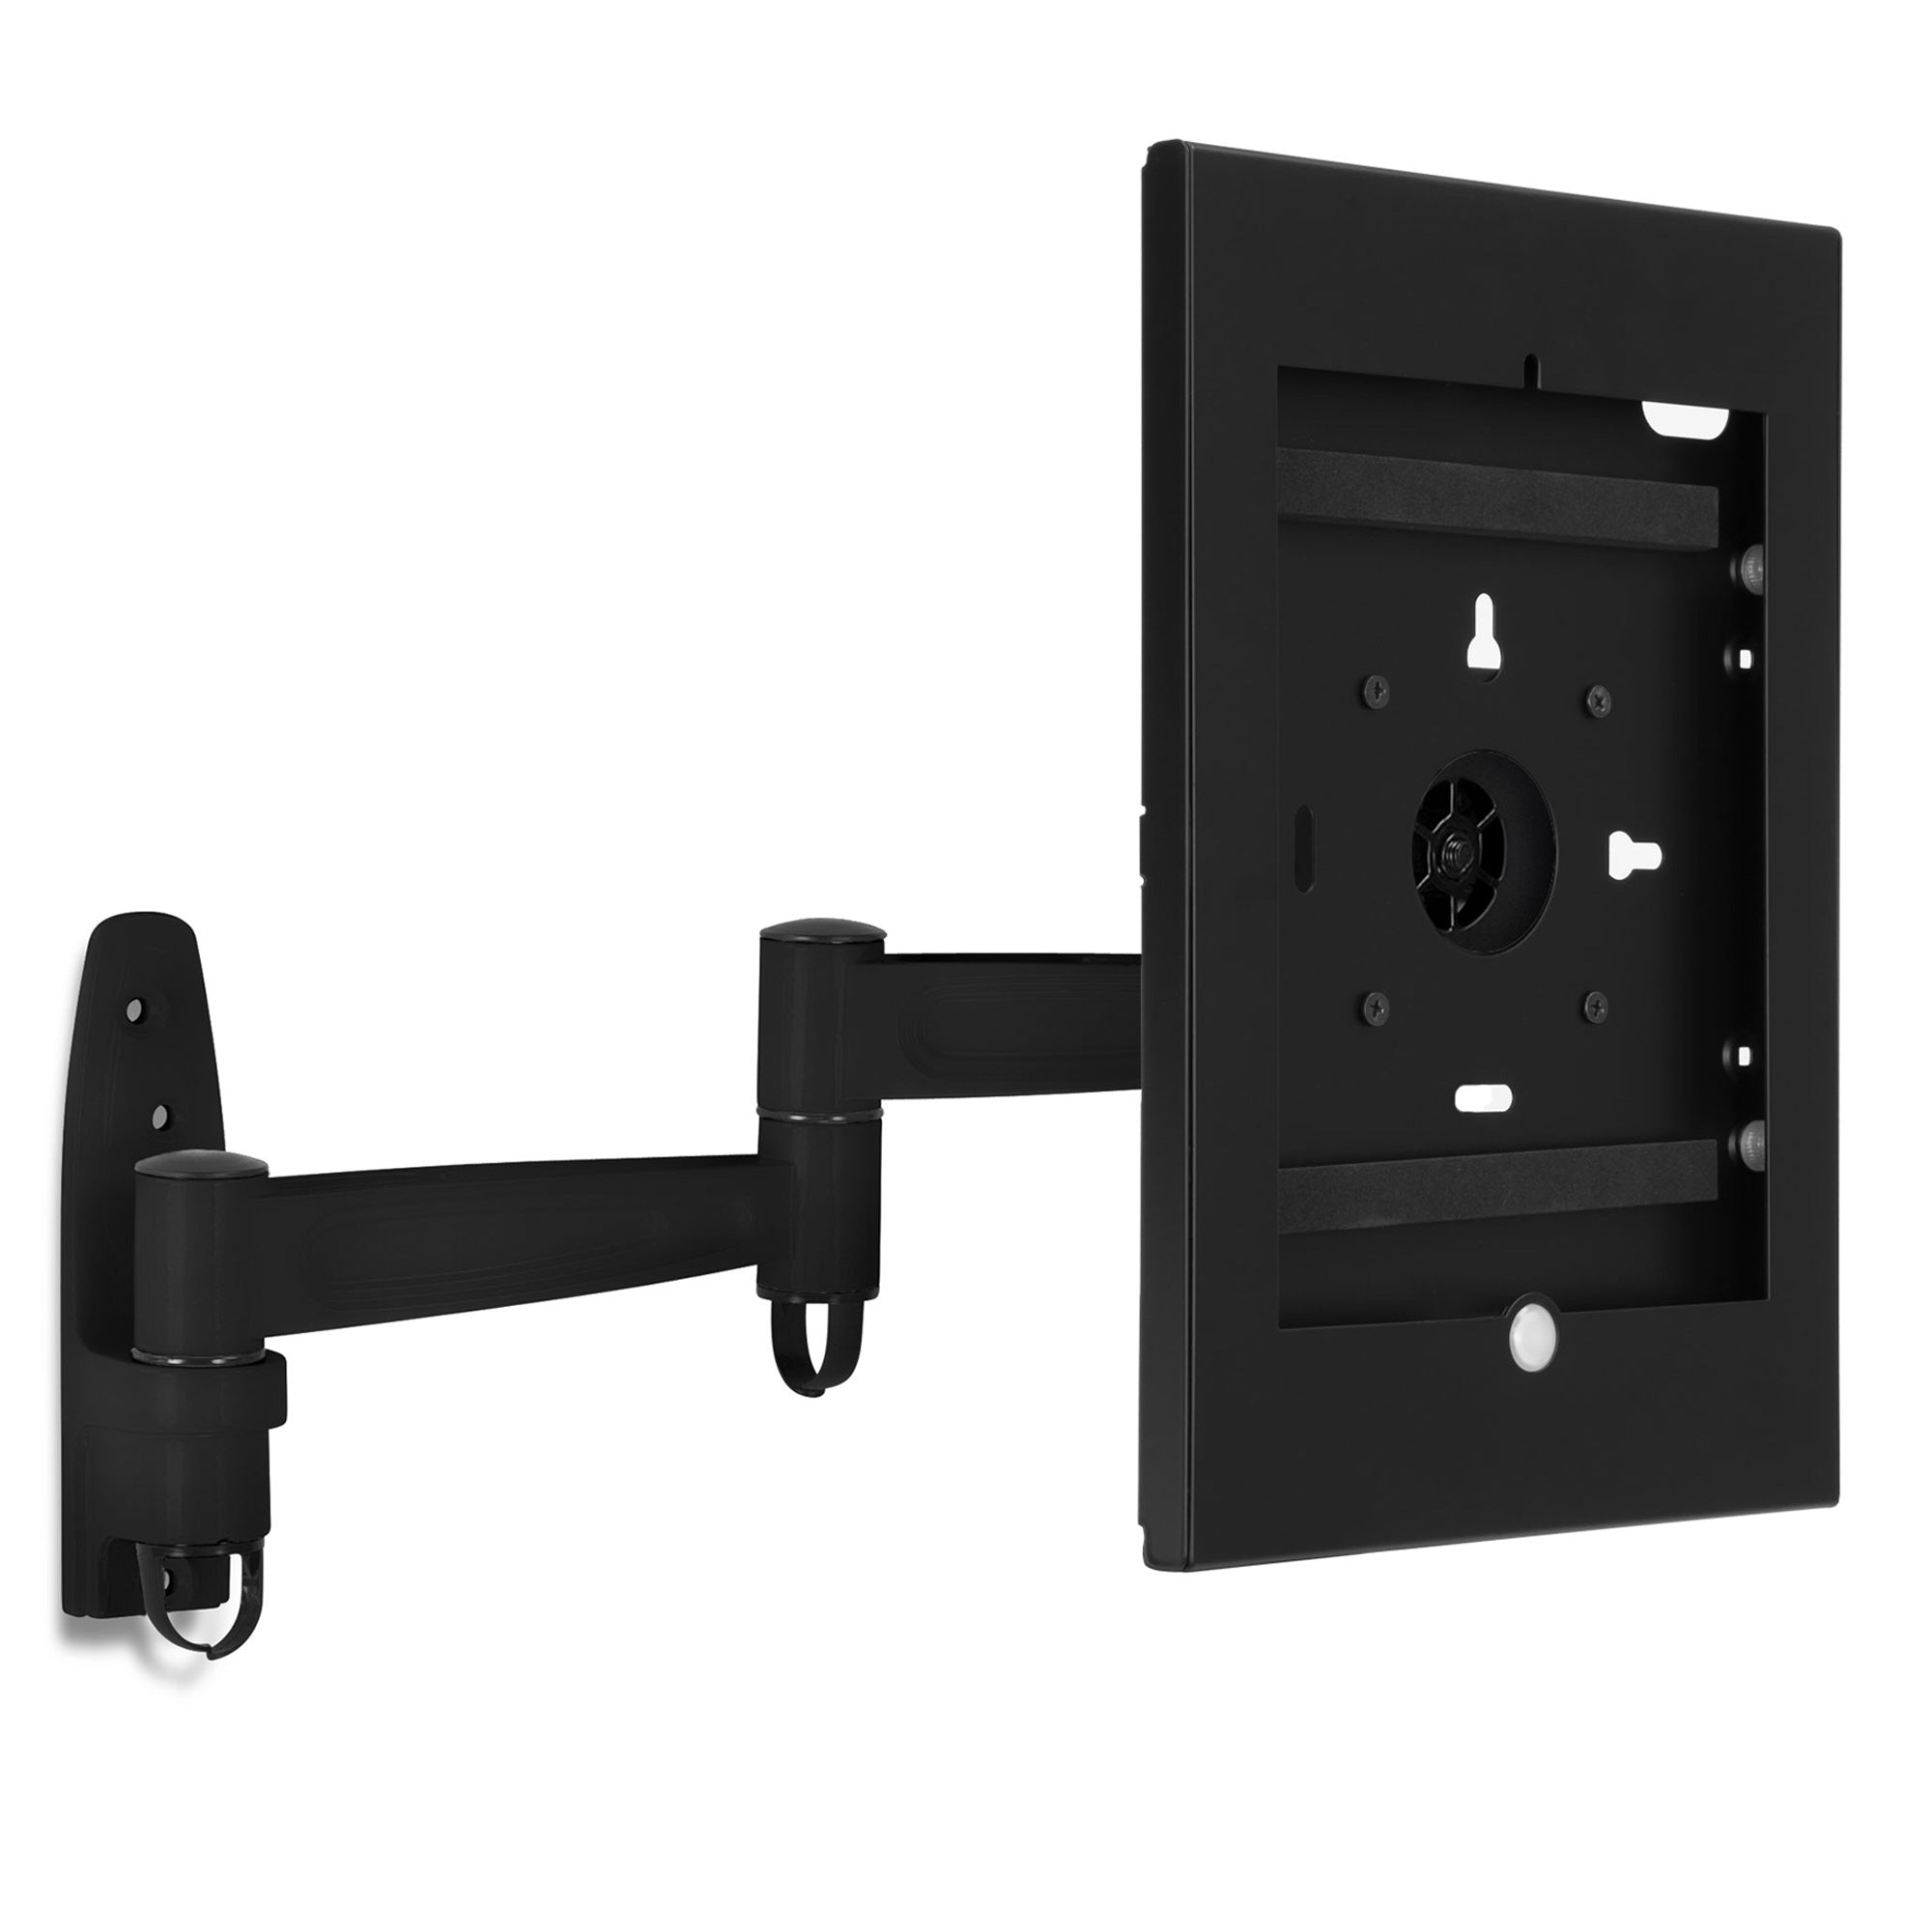 Secure iPad Wall Mount Enclosure w/ Swing Arm for iPad Generations 8 and 9